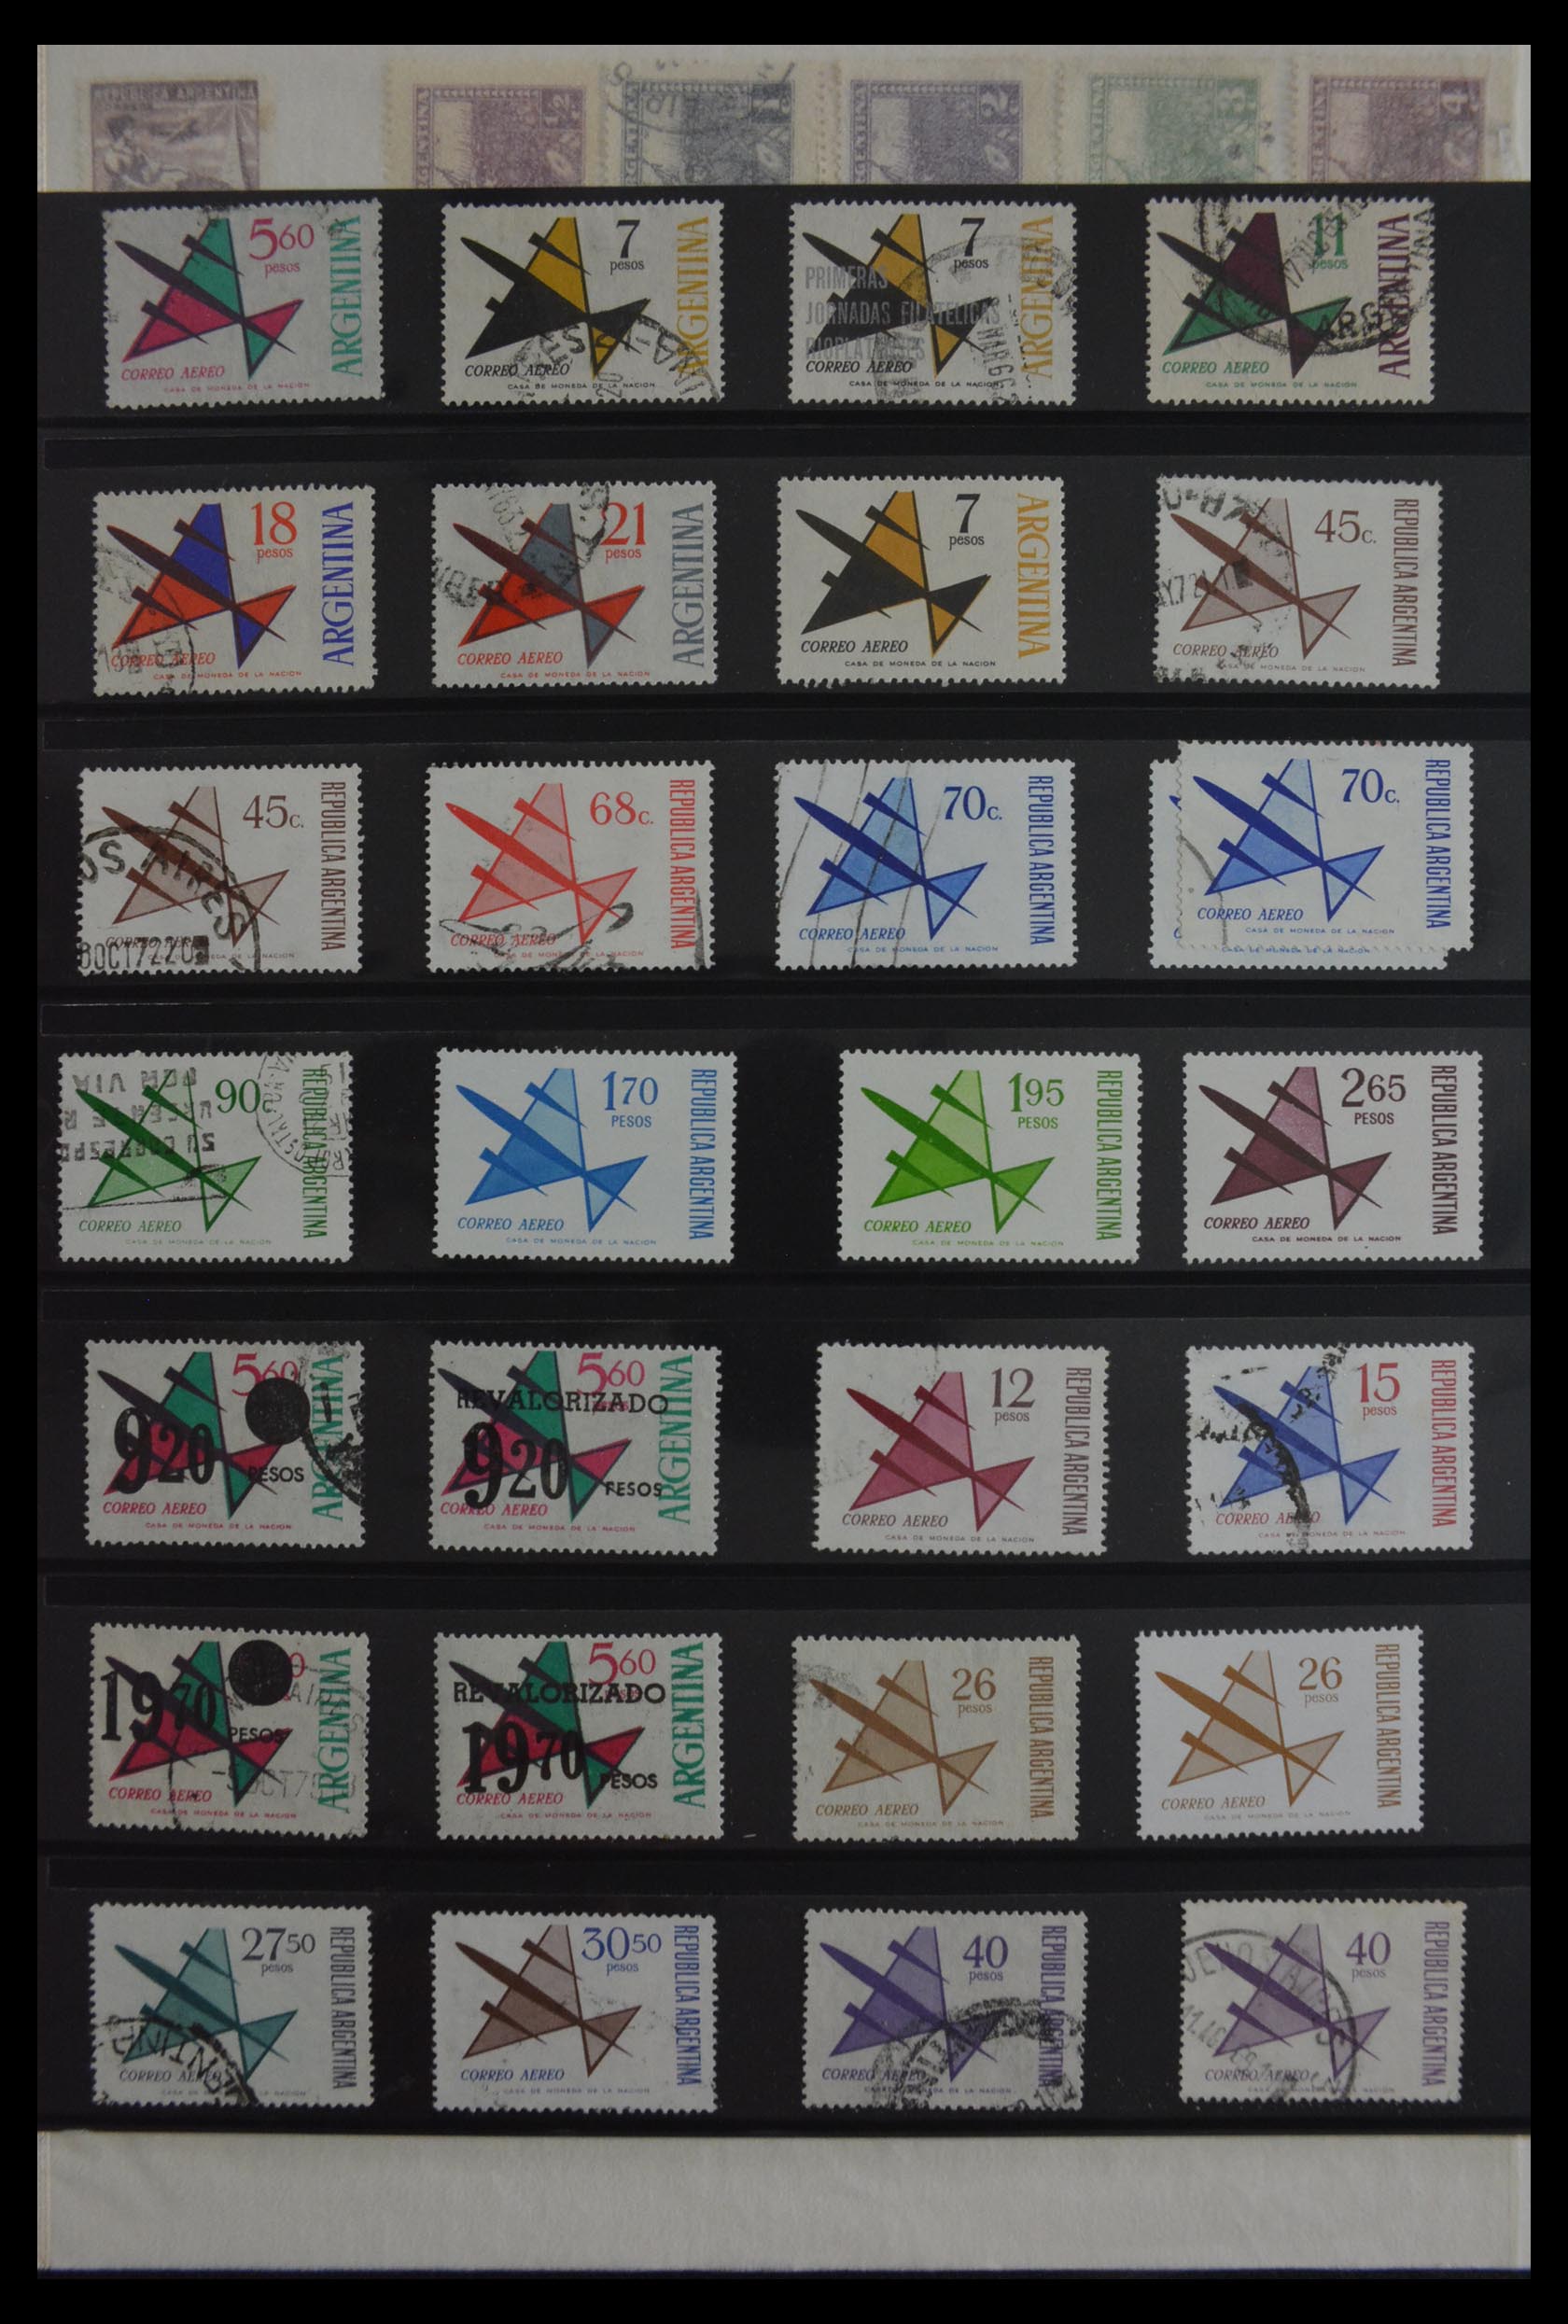 29917 007 - 29917 Latin America airmail stamps.